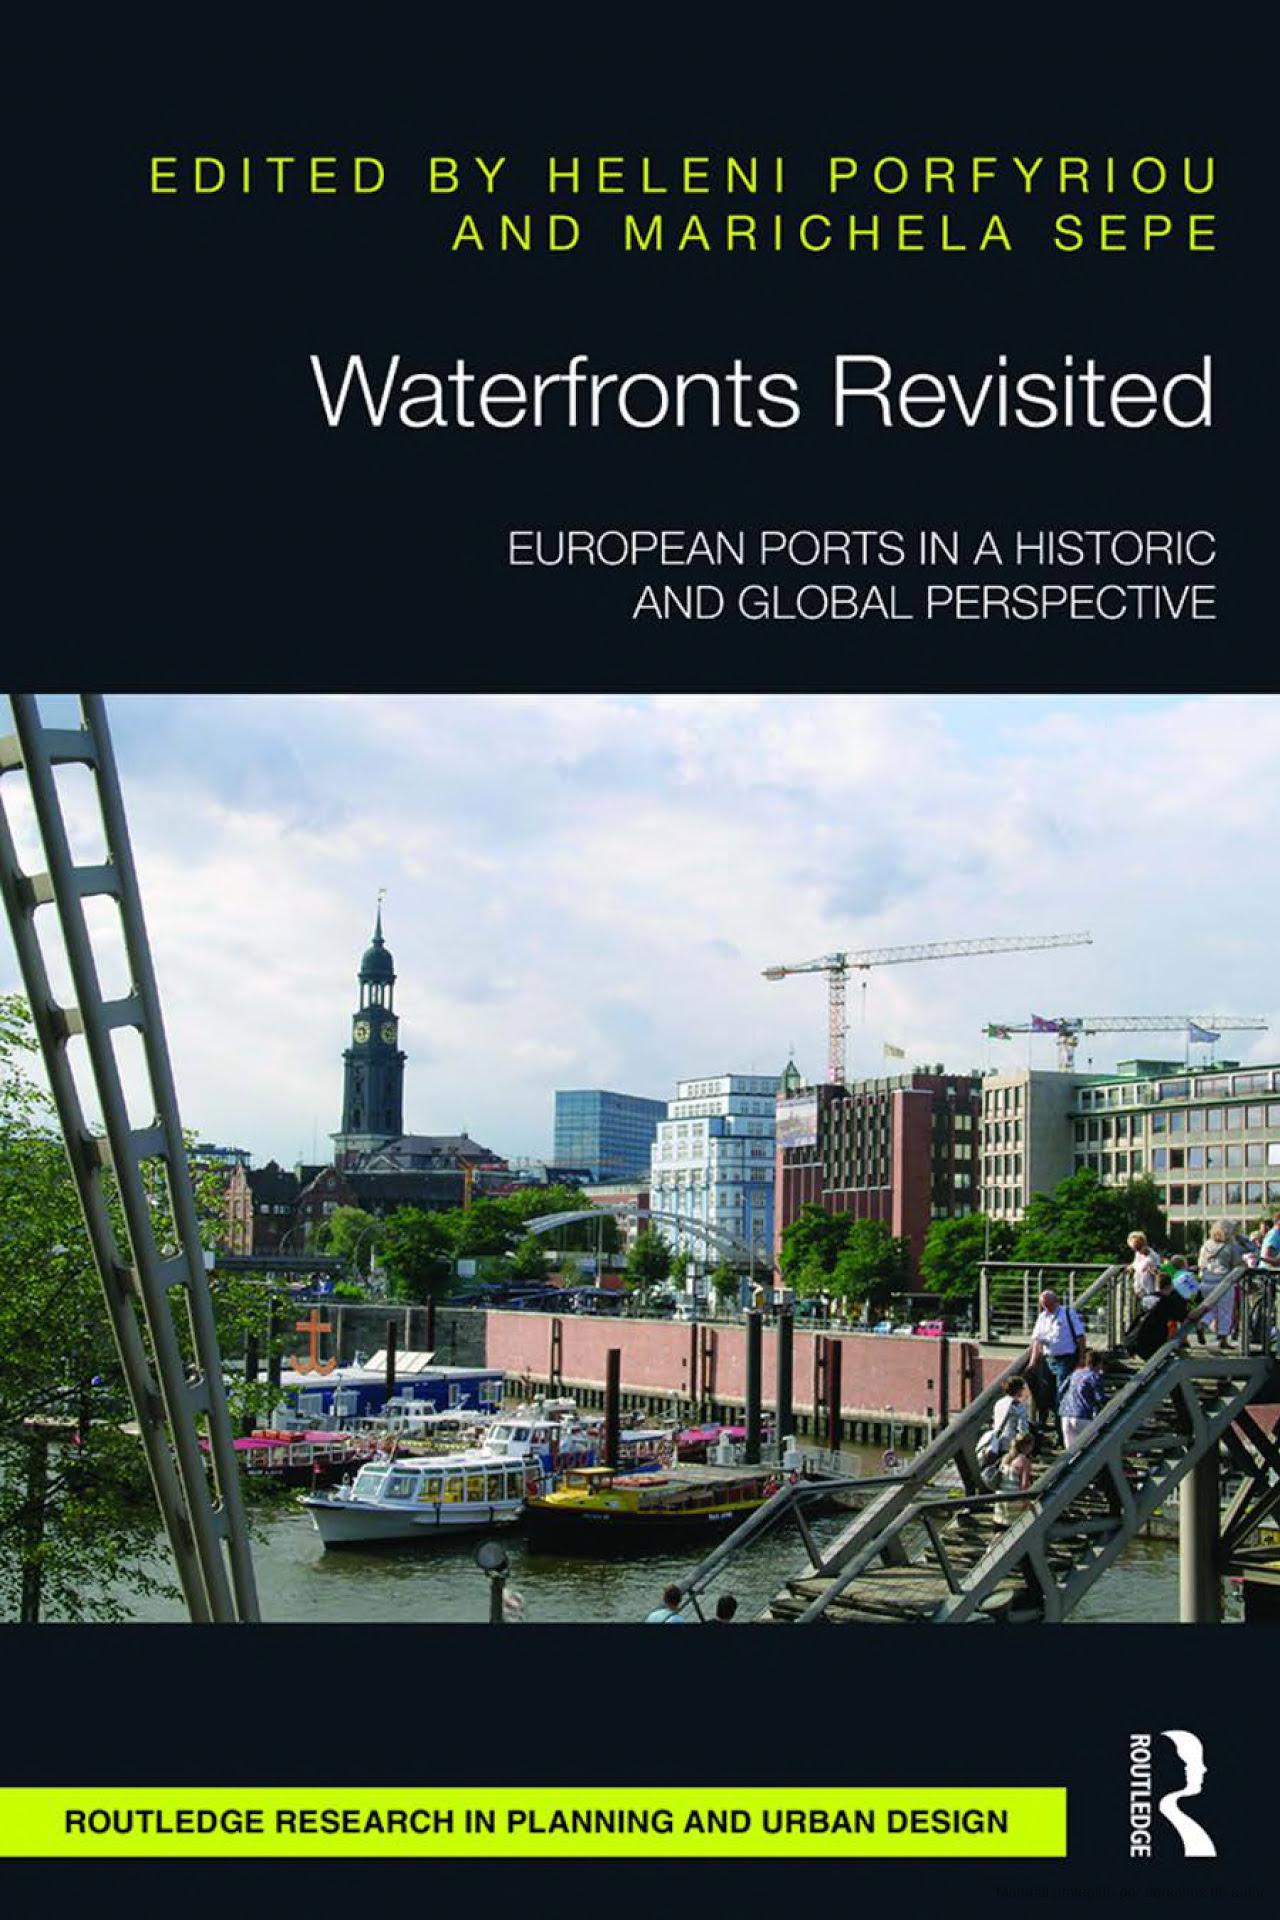 "Waterfronts revisited, European ports in a historic and global perspective"